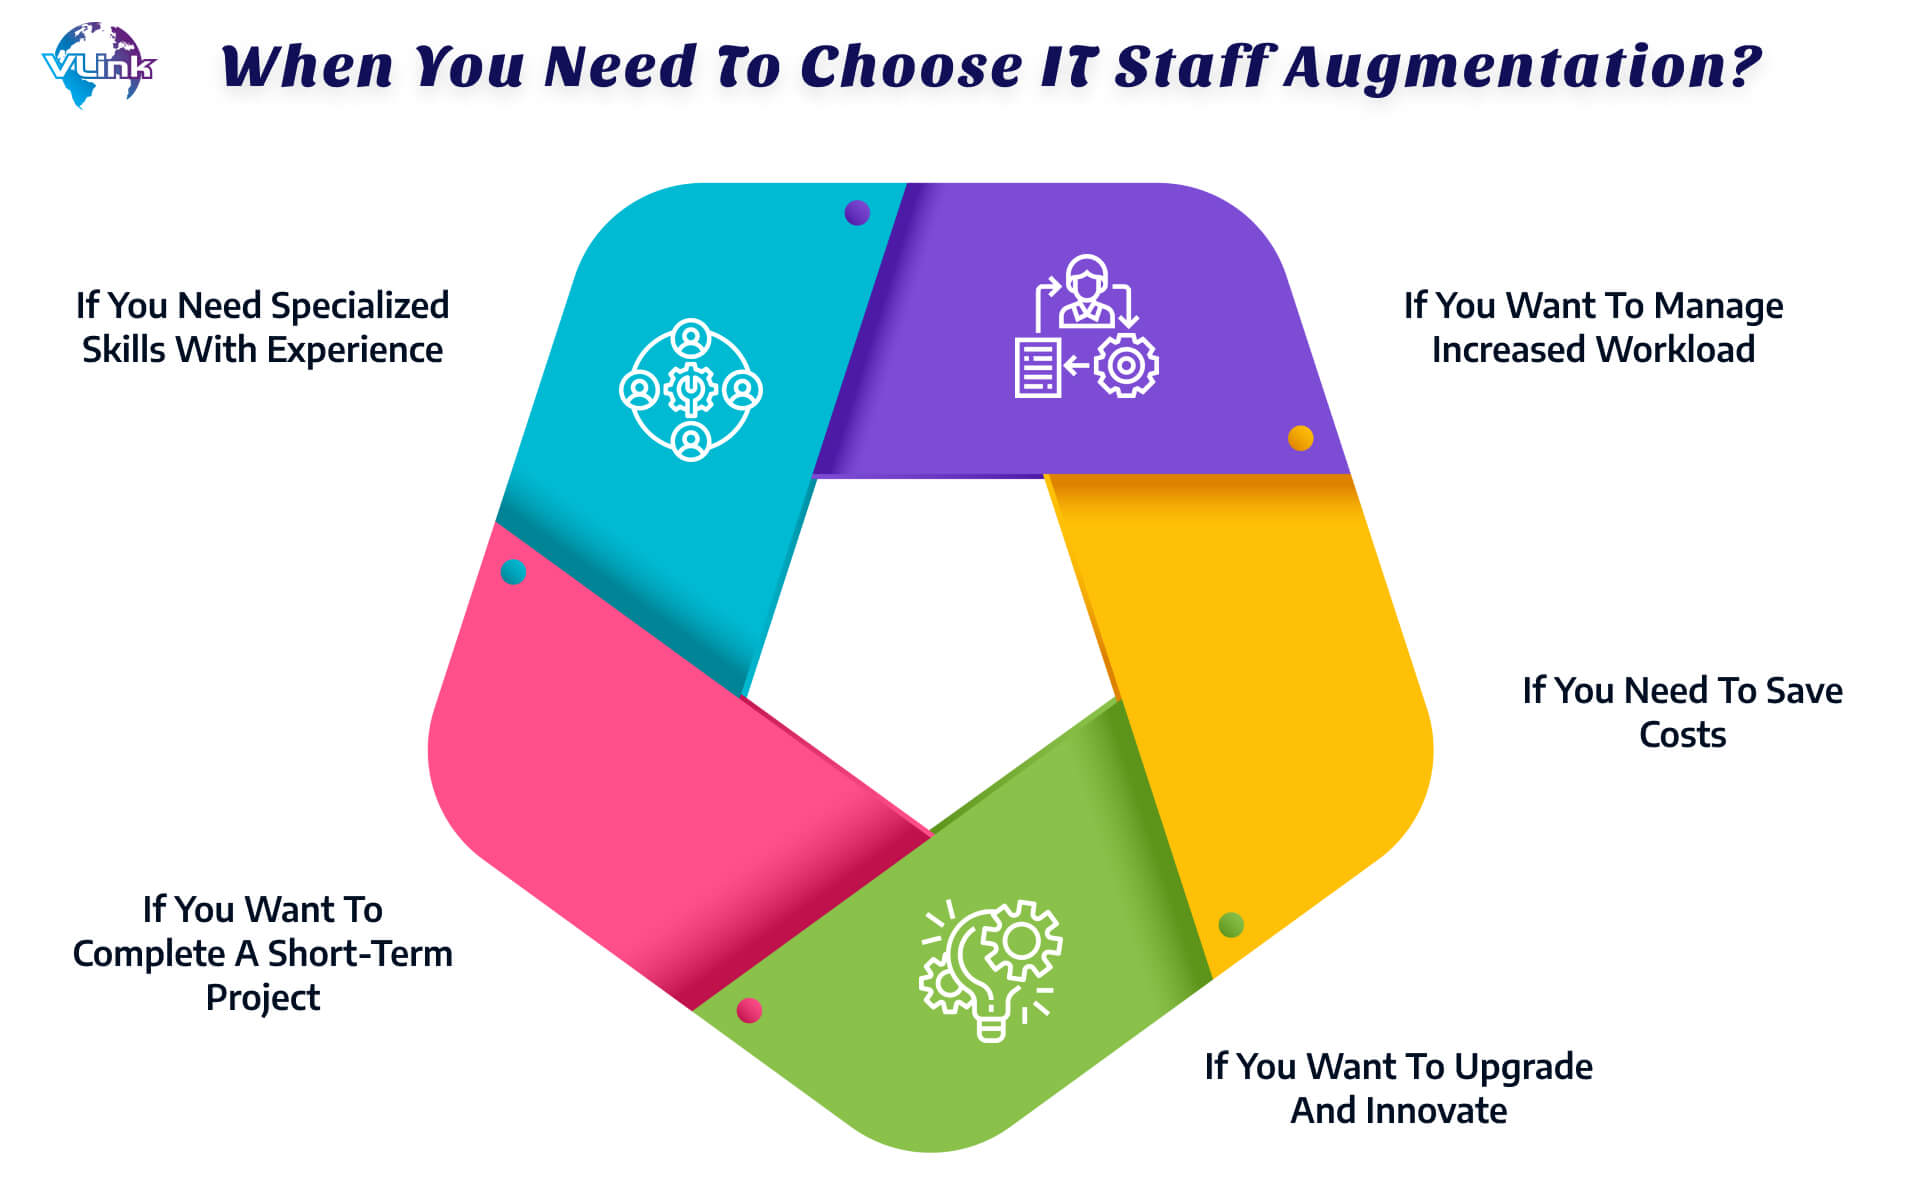 When Do You Need to Choose IT Staff Augmentation